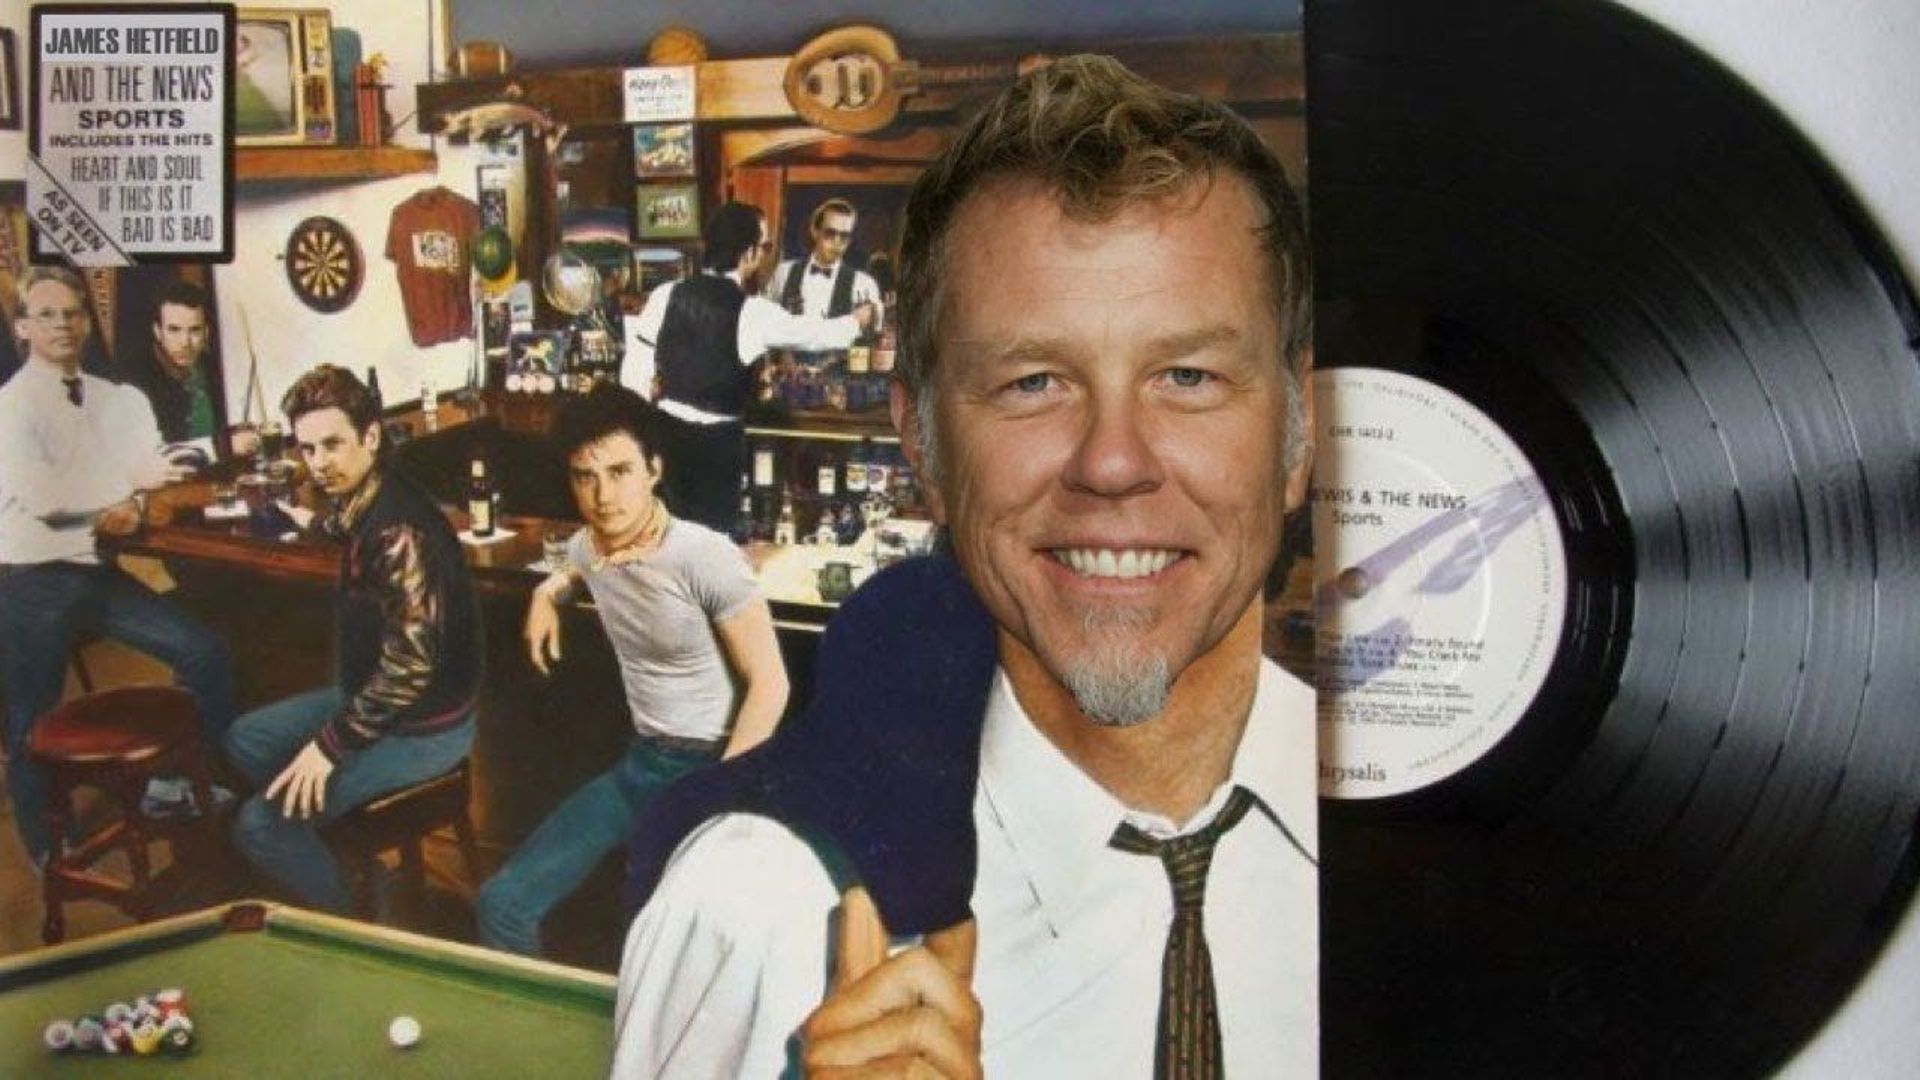 [Zapping 21] Un mash-up inattendu entre Metallica et Huey Lewis And The News